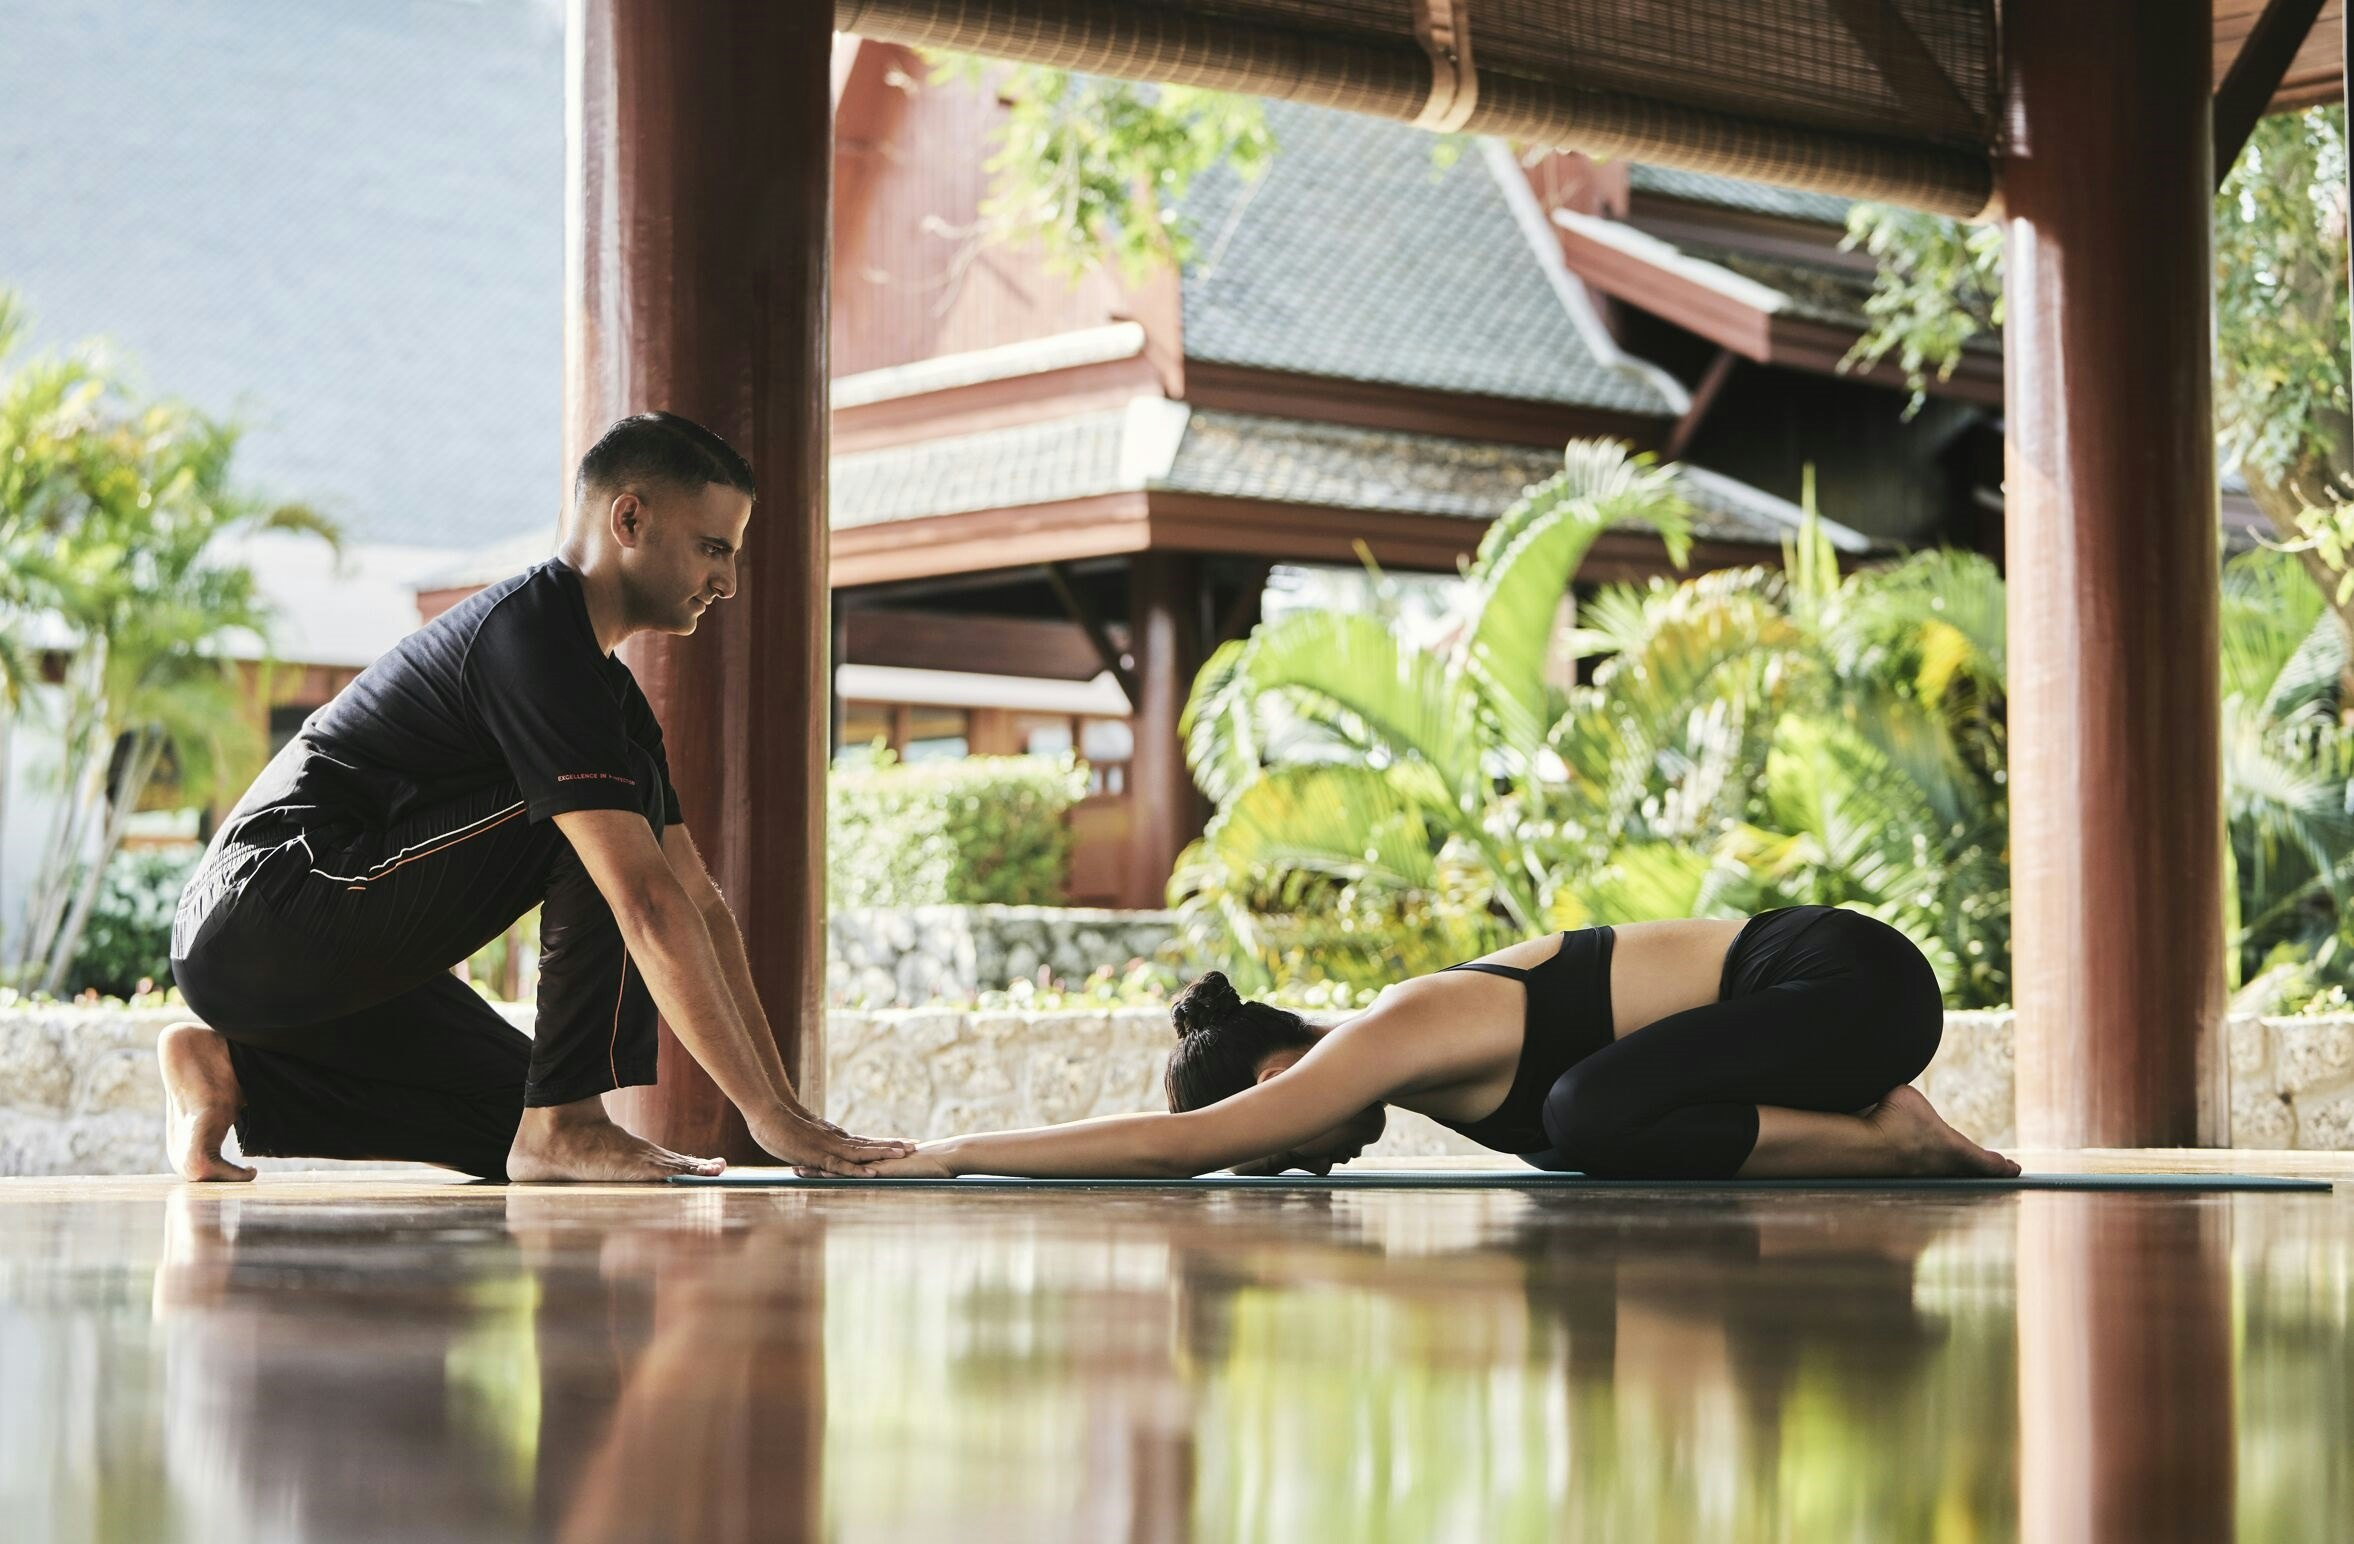 A woman poses for yoga with assistance from her instructor, in Thailand